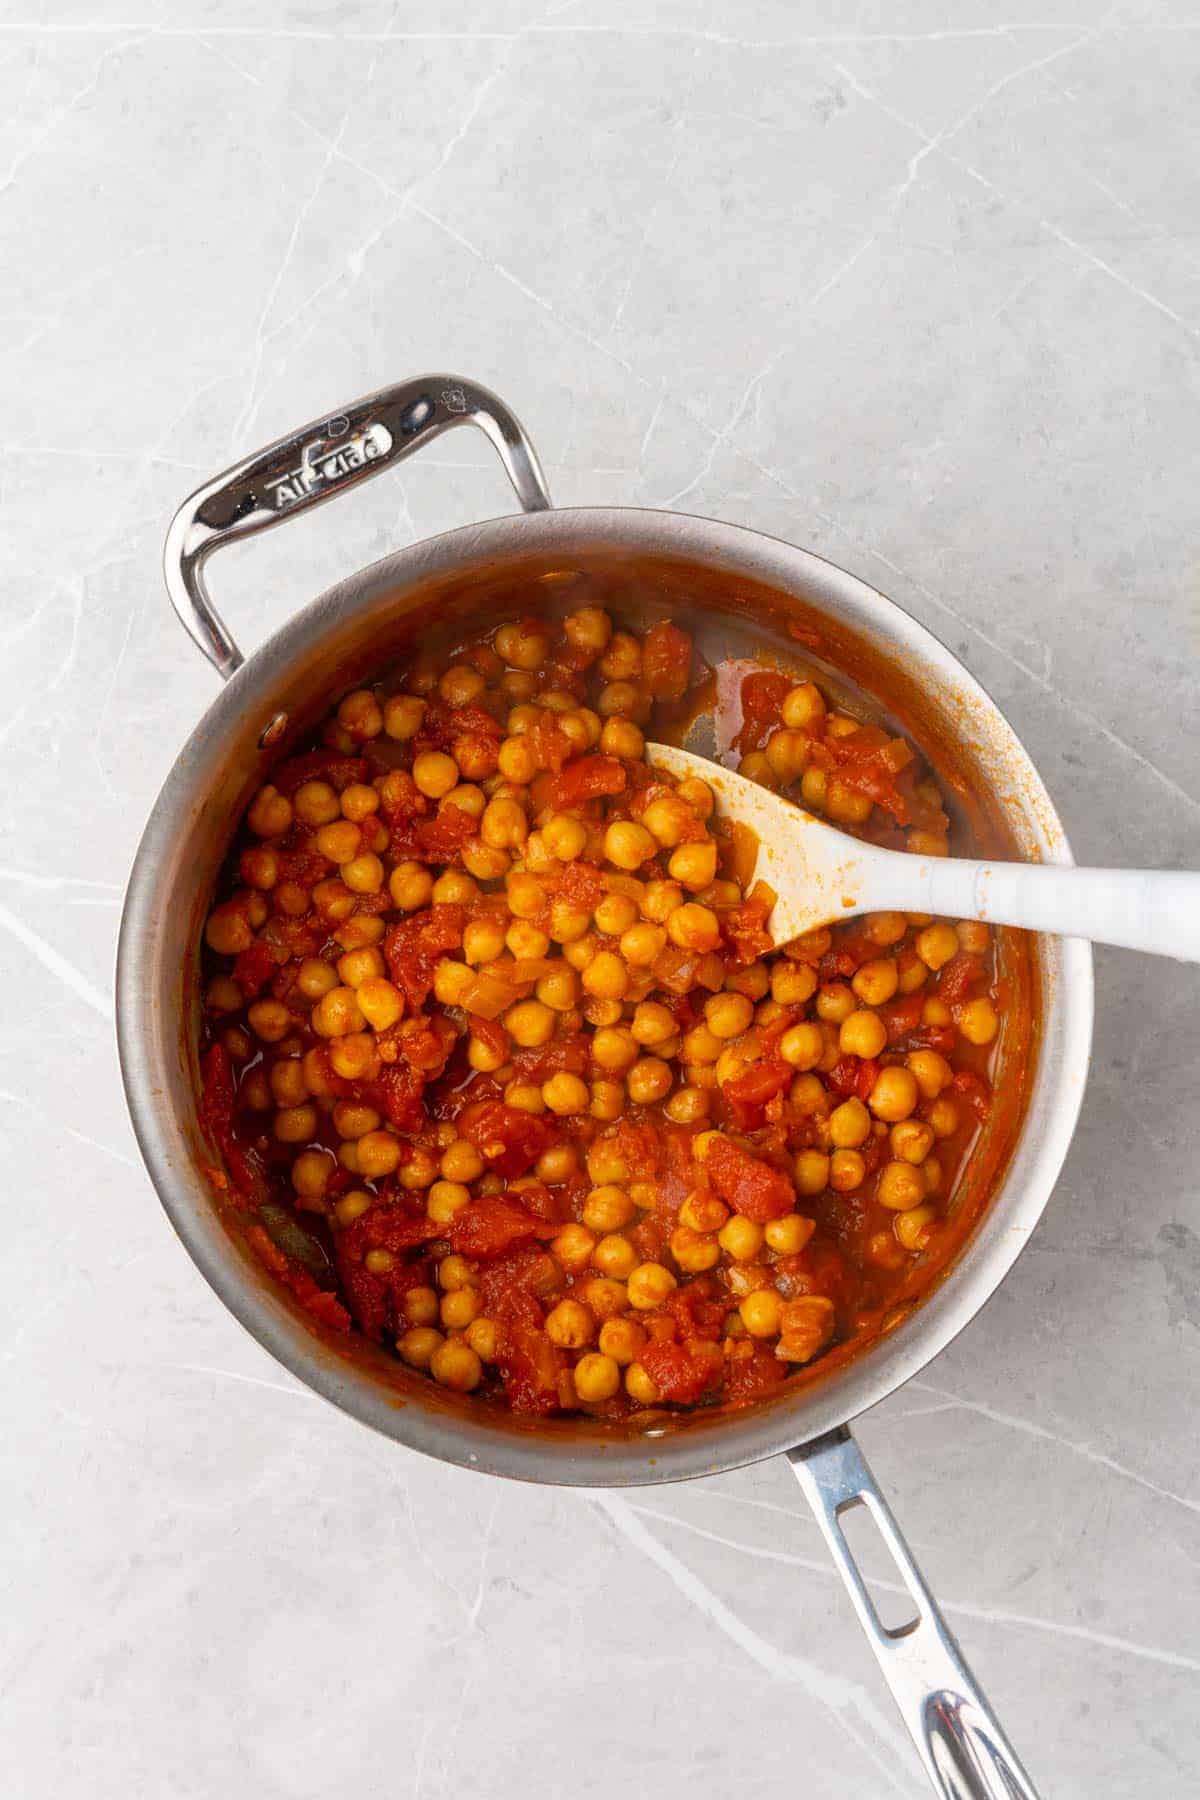 Chickpeas and tomatoes added to the silver saucepan with a white ladle for stirring, as seen from above on a white marble countertop